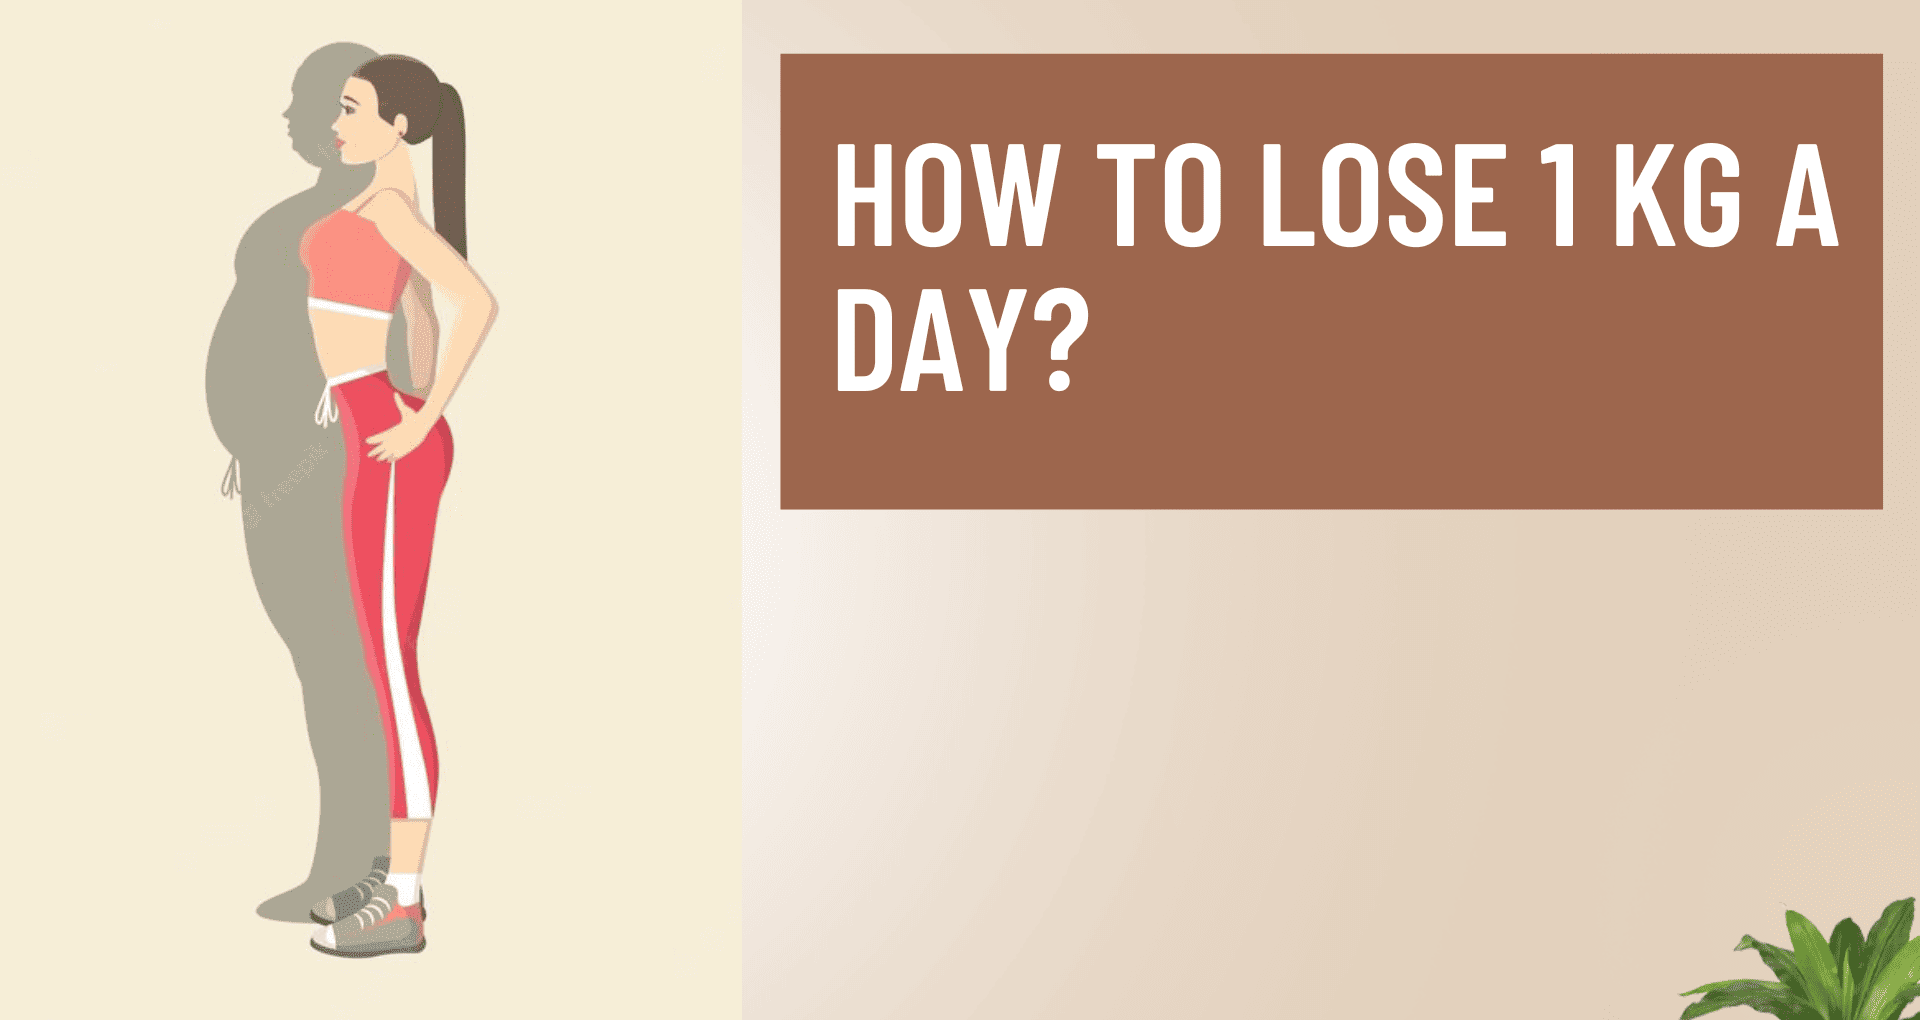 How to lose weight: 1 kg in 1 day (without doing anything extreme